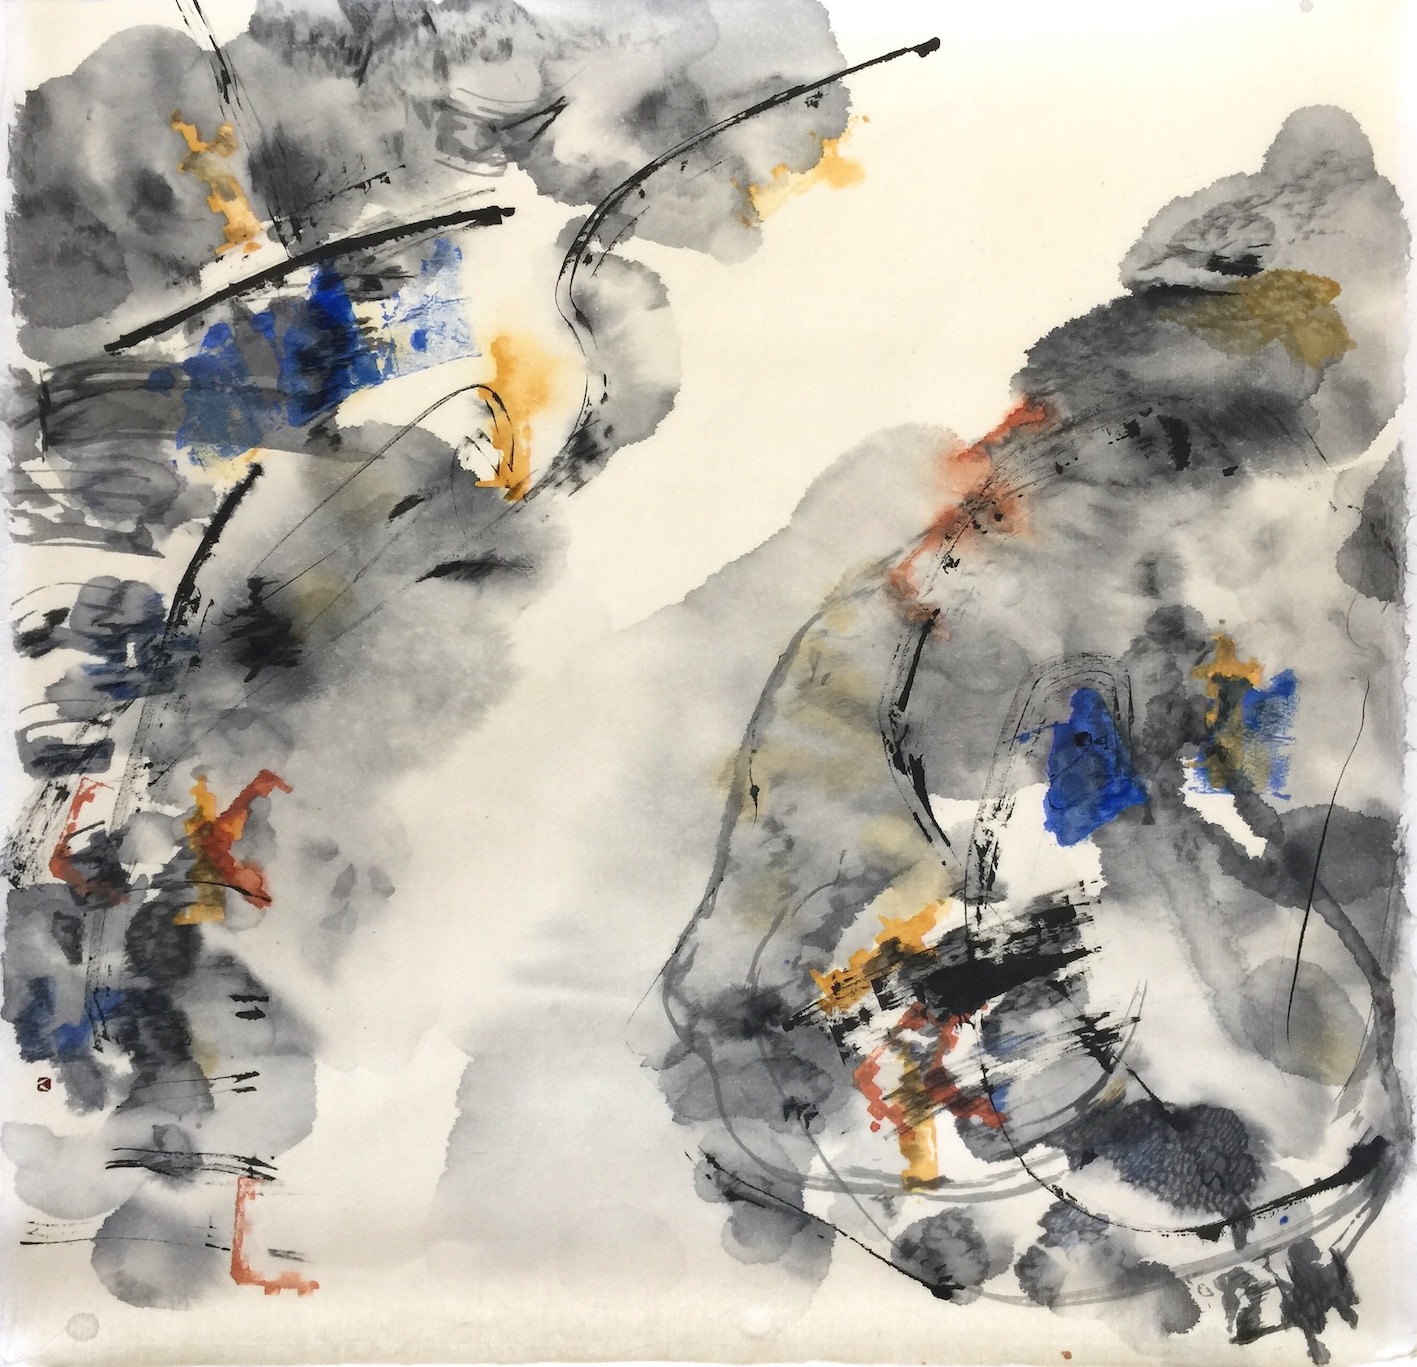 Breaks in the Clouds 5 49 X 48 cms, Sumi ink, acrylic 雲の裂け目 5 墨、アクリル　　2020